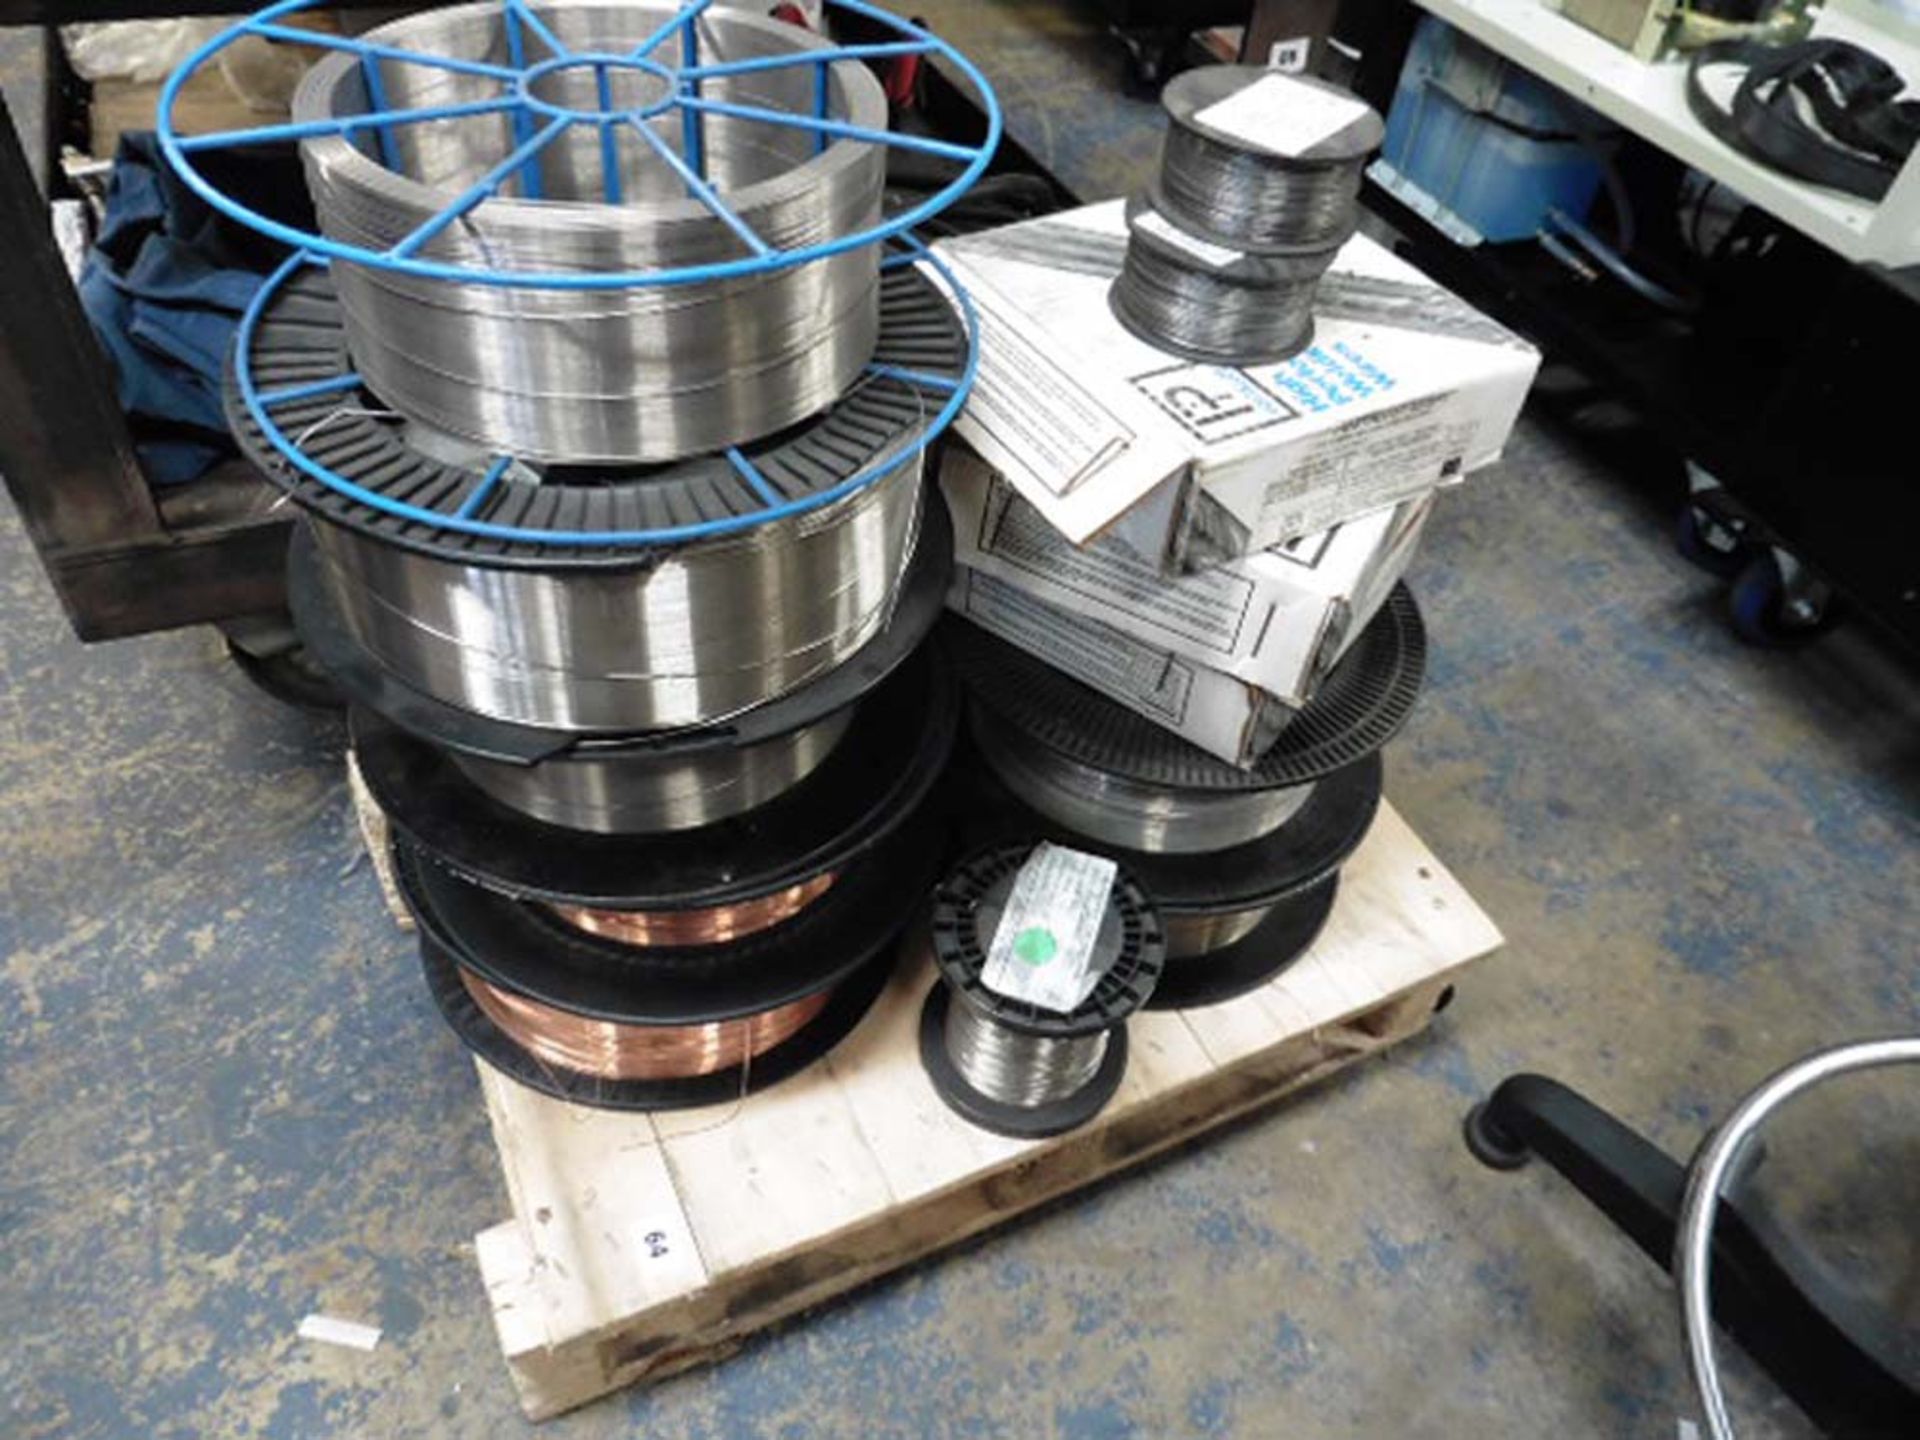 Small pallet of various part used reels Mig and Tig welding wire